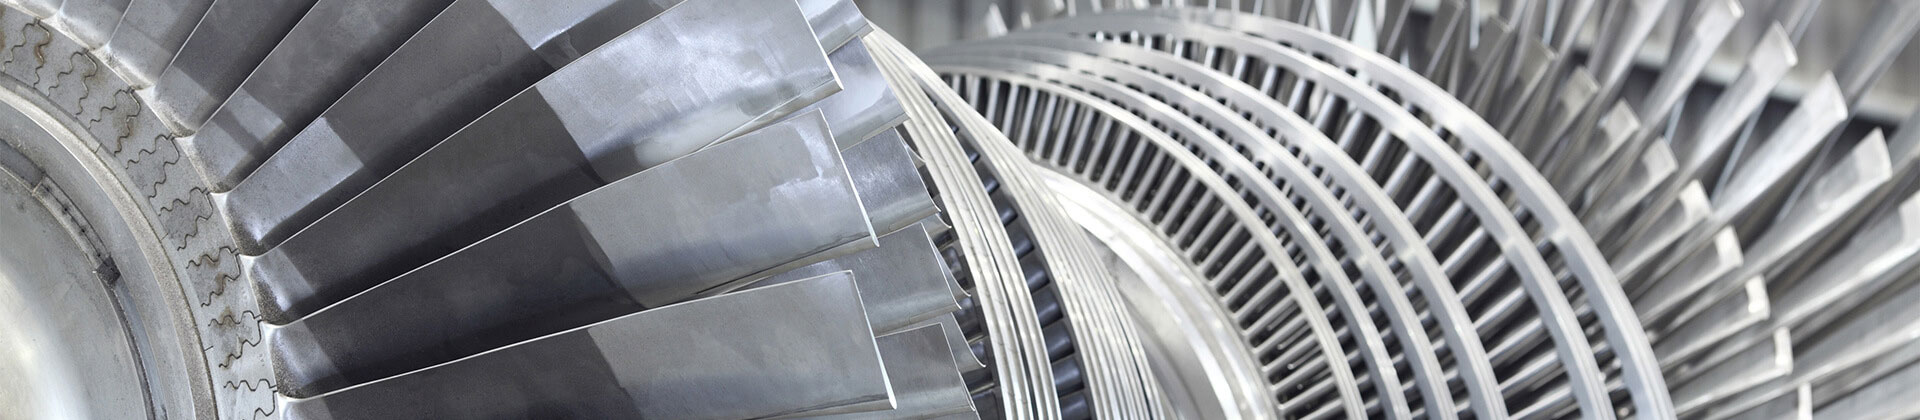 Steam turbines need to be free of silica, SiO2 deposits that cause uneven surfaces and increase resistance to steam flow. Silica deposits vary with causes, but the most significant factor in minimizing turbine silica deposits is by maintaining low silica concentrations in boiler water.